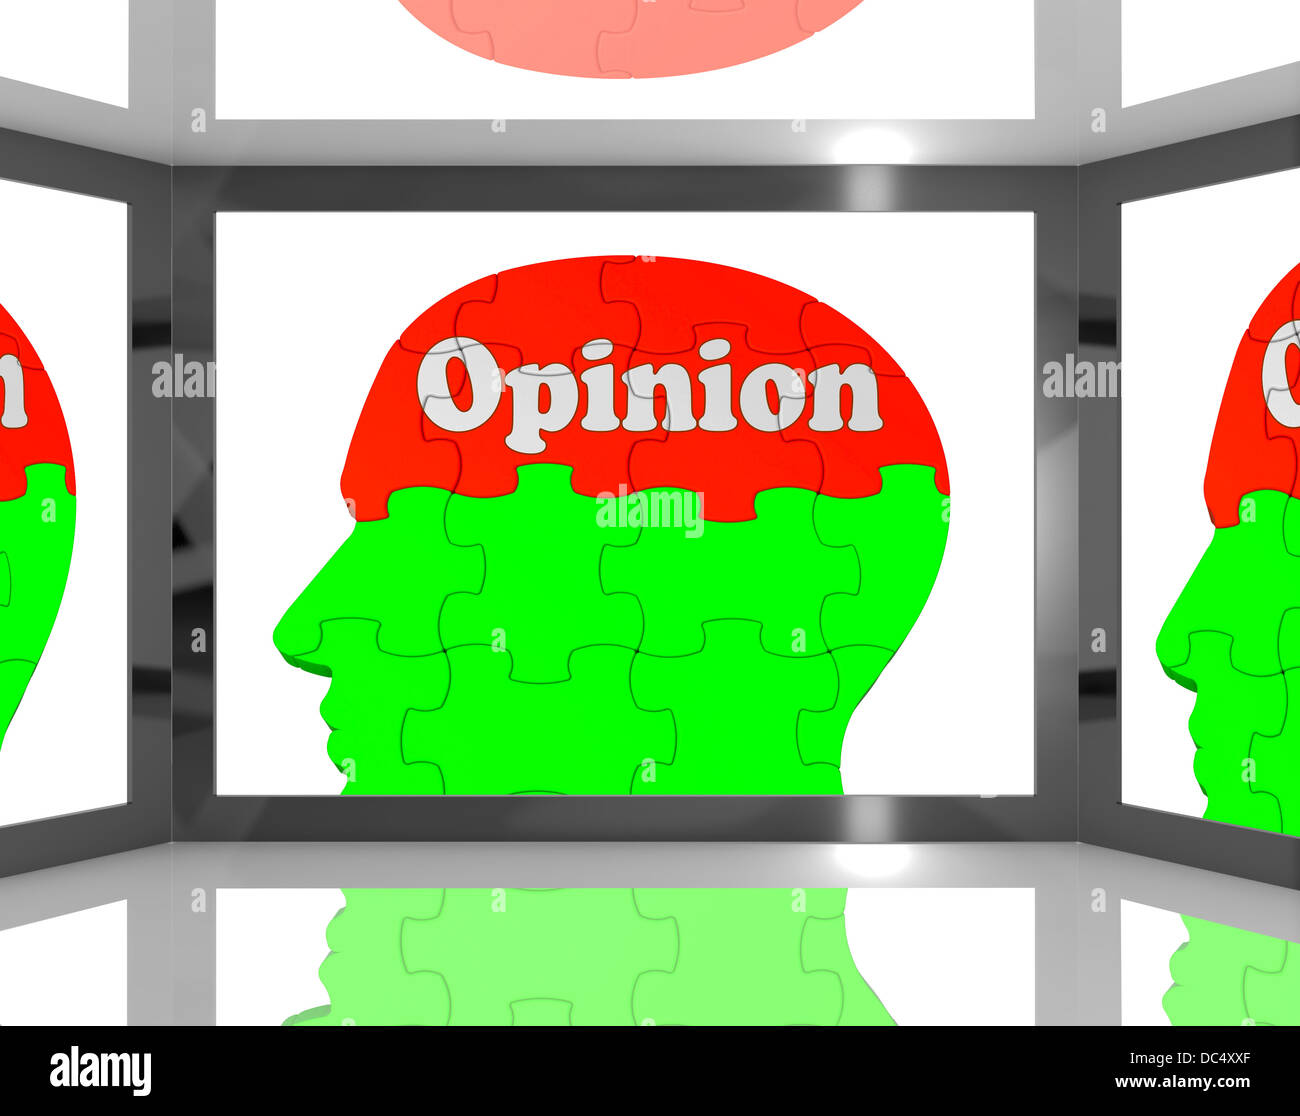 Opinion On Brain On Screen Showing Personal Opinion Stock Photo